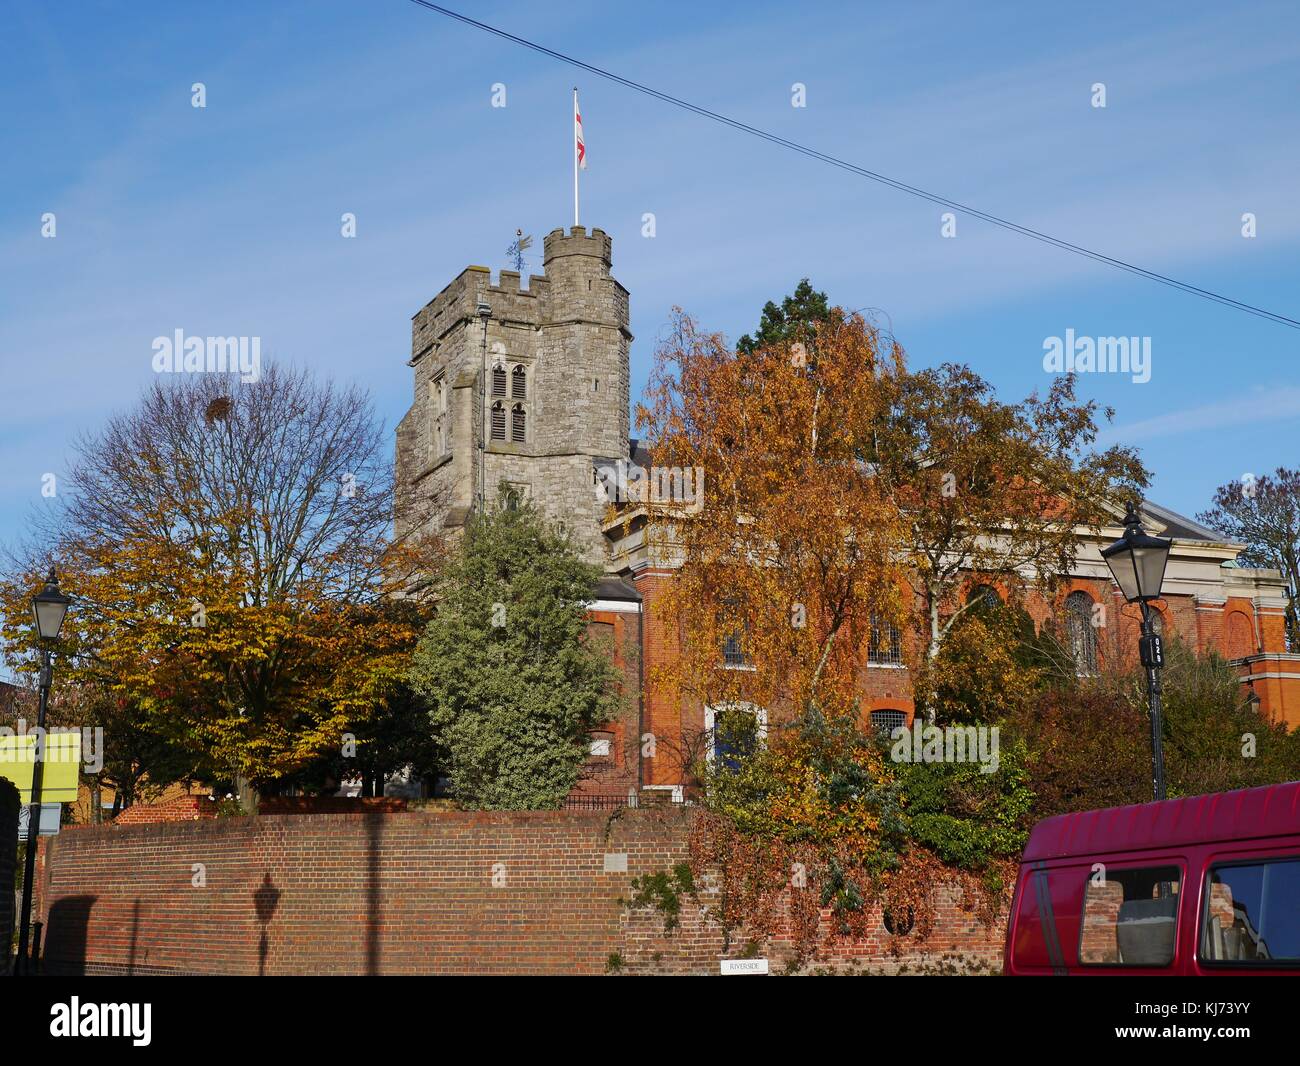 The  medieval tower of St mary's Church in Twickenham London Stock Photo